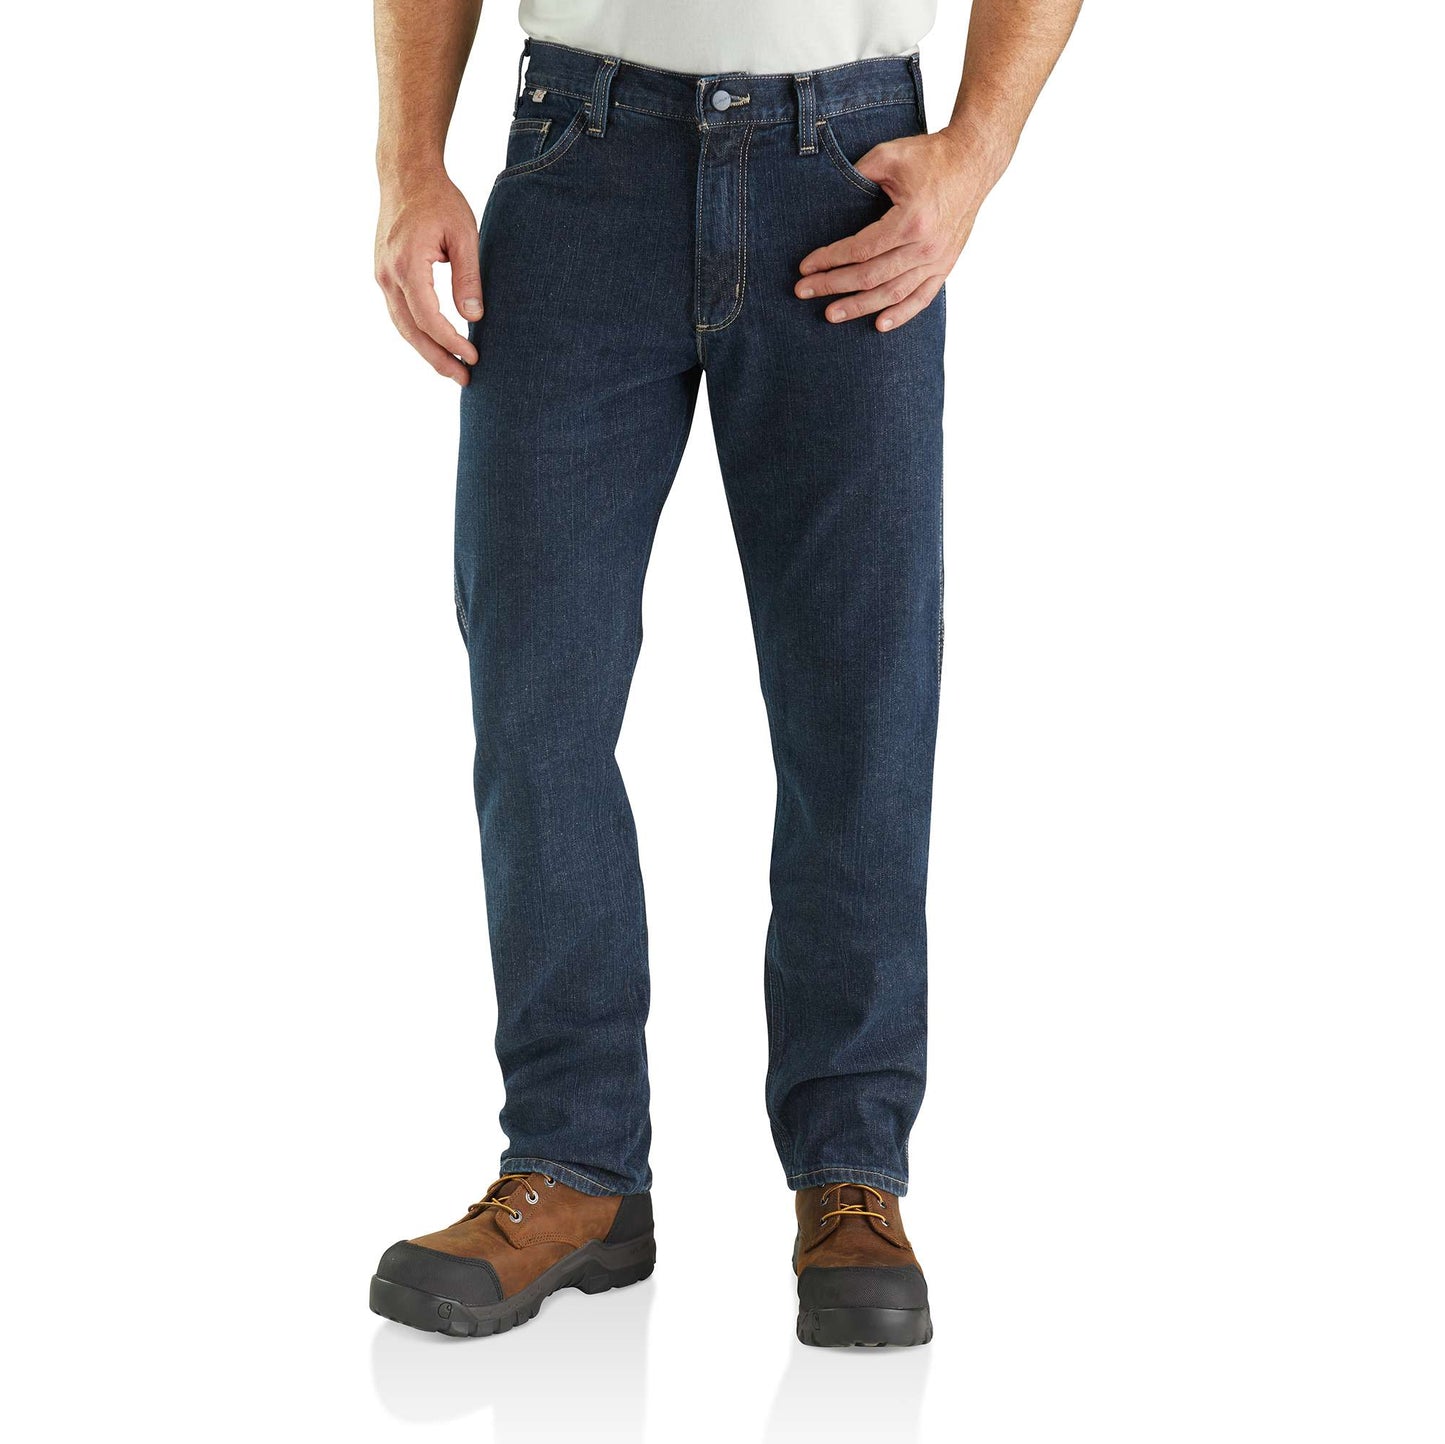 Carhartt FR Rugged Flex Relaxed Fit Canvas Work Pant